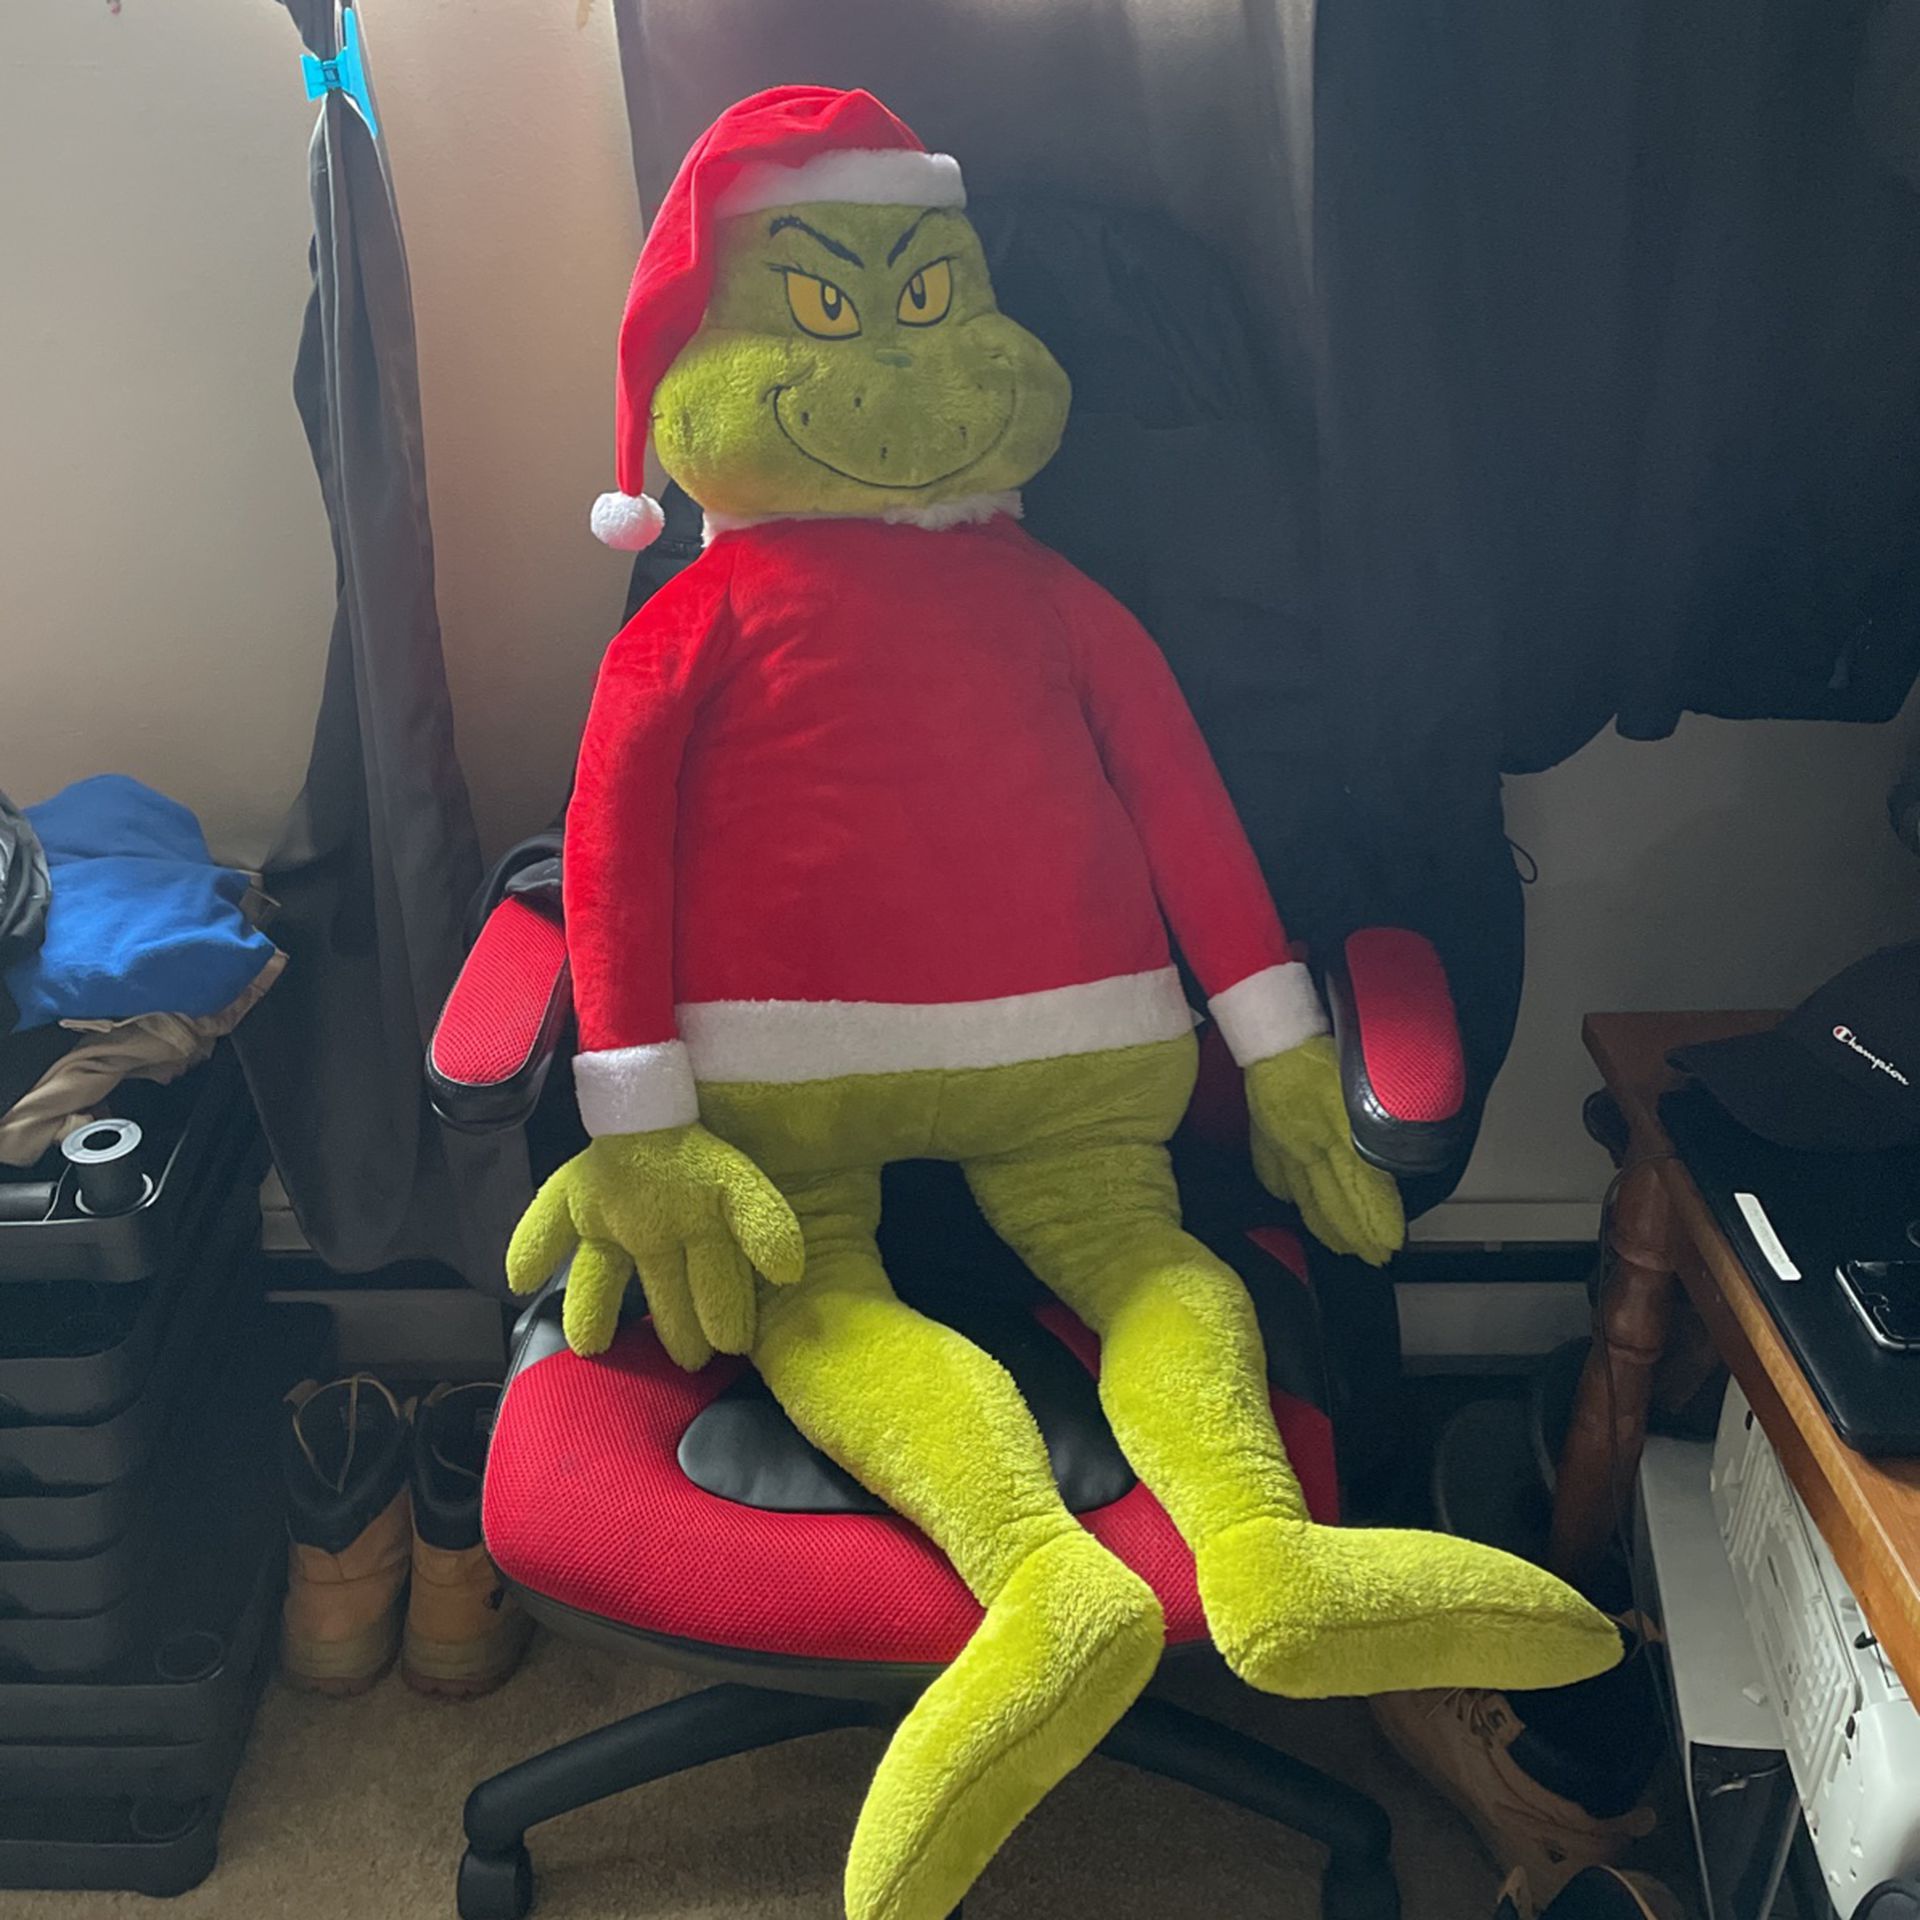 The Grinch “Stuffed Animal” 4 FT TALL $60